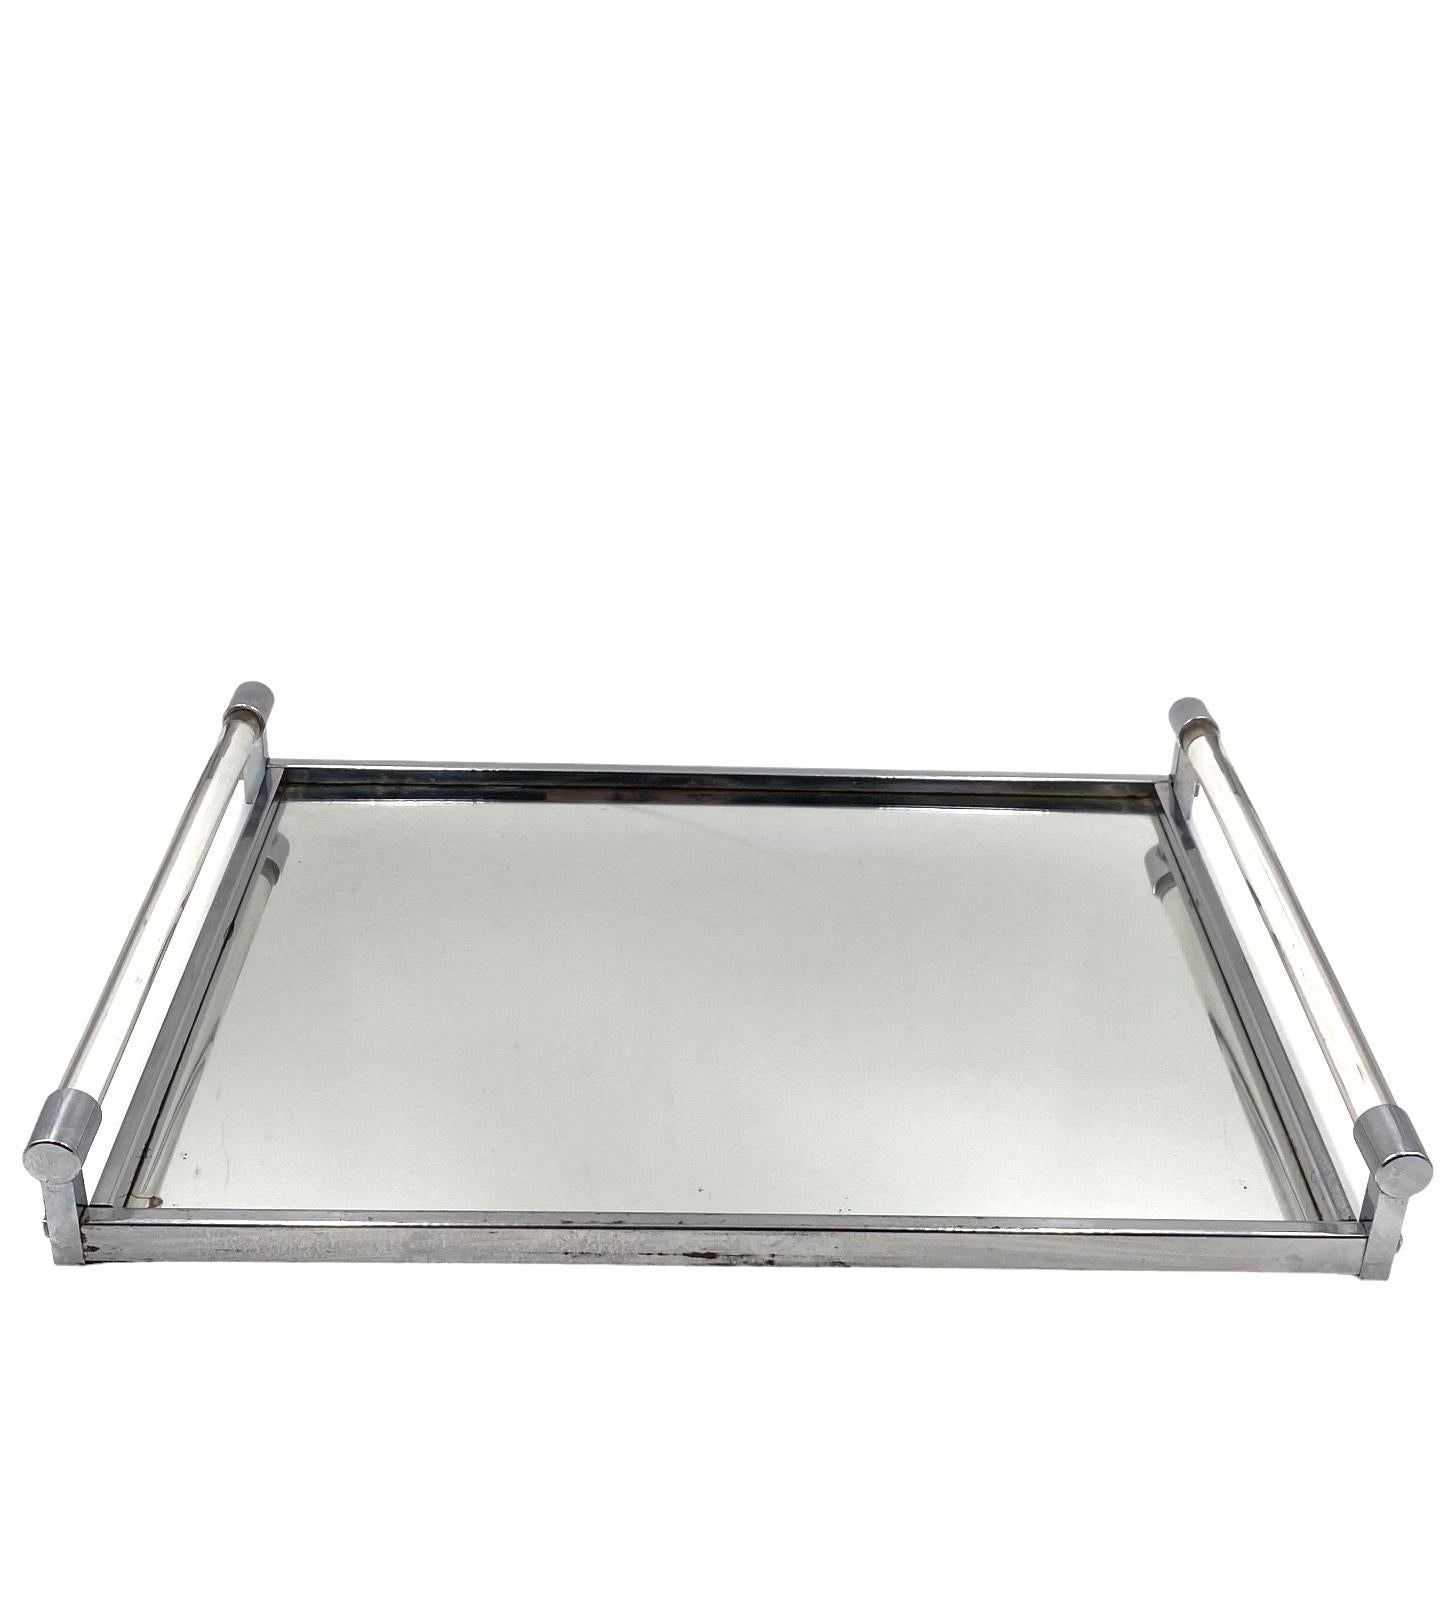 Jacques Adnet, Modernist lucite mirrored tray, Maison Adnet, France 1940s For Sale 7